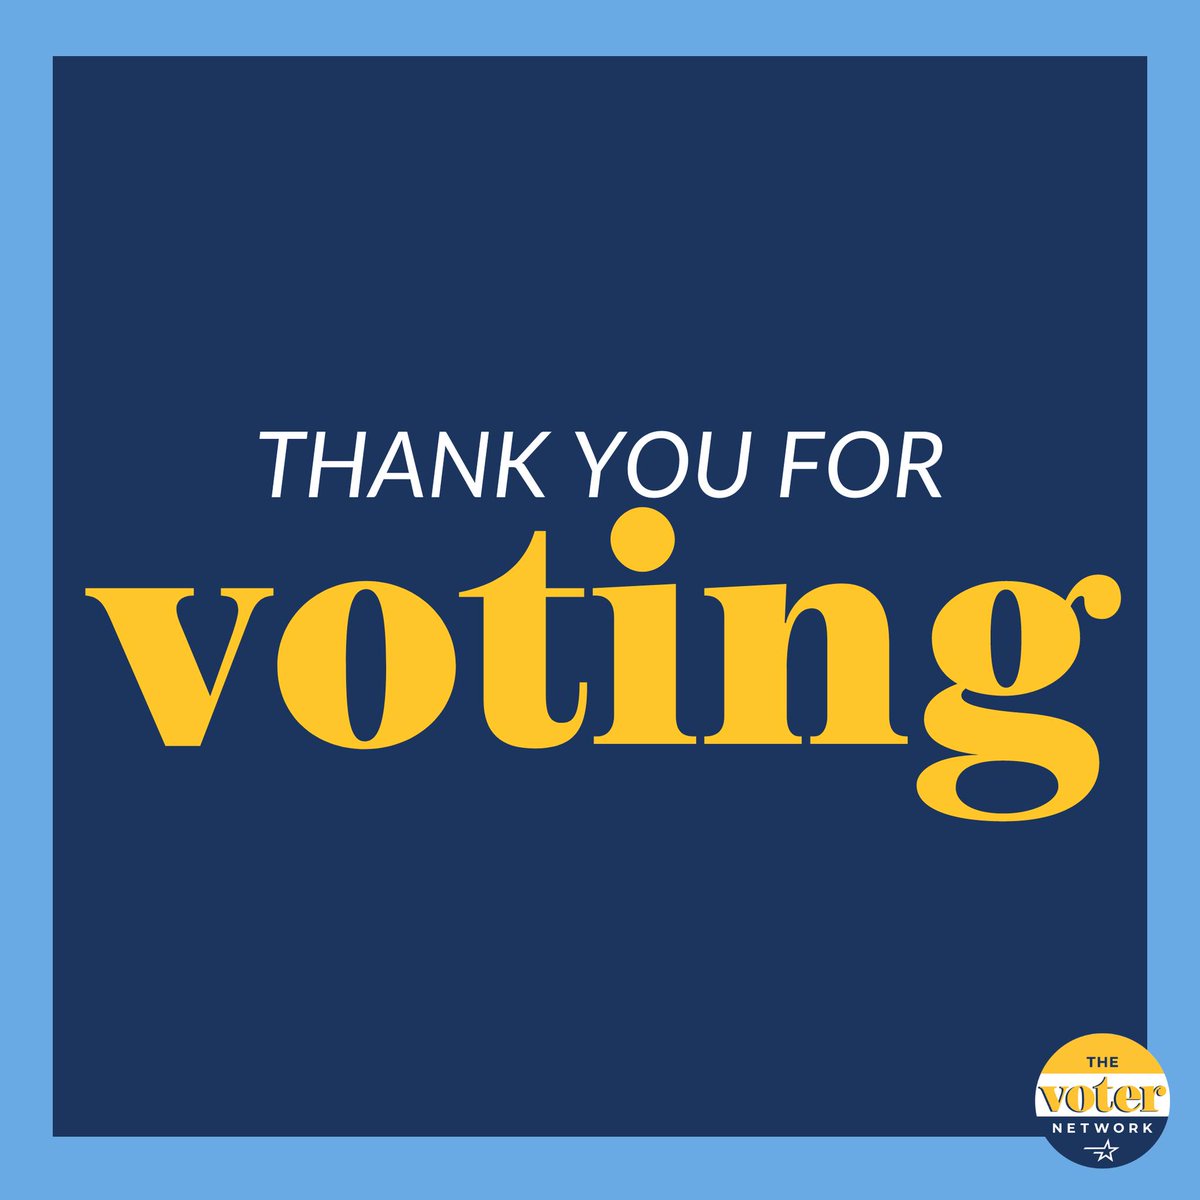 Ballots are still being counted (which is normal) and the election won't be certified for a bit either (also normal), but we wanted to hop on and thank you for voting and encouraging your networks to vote!